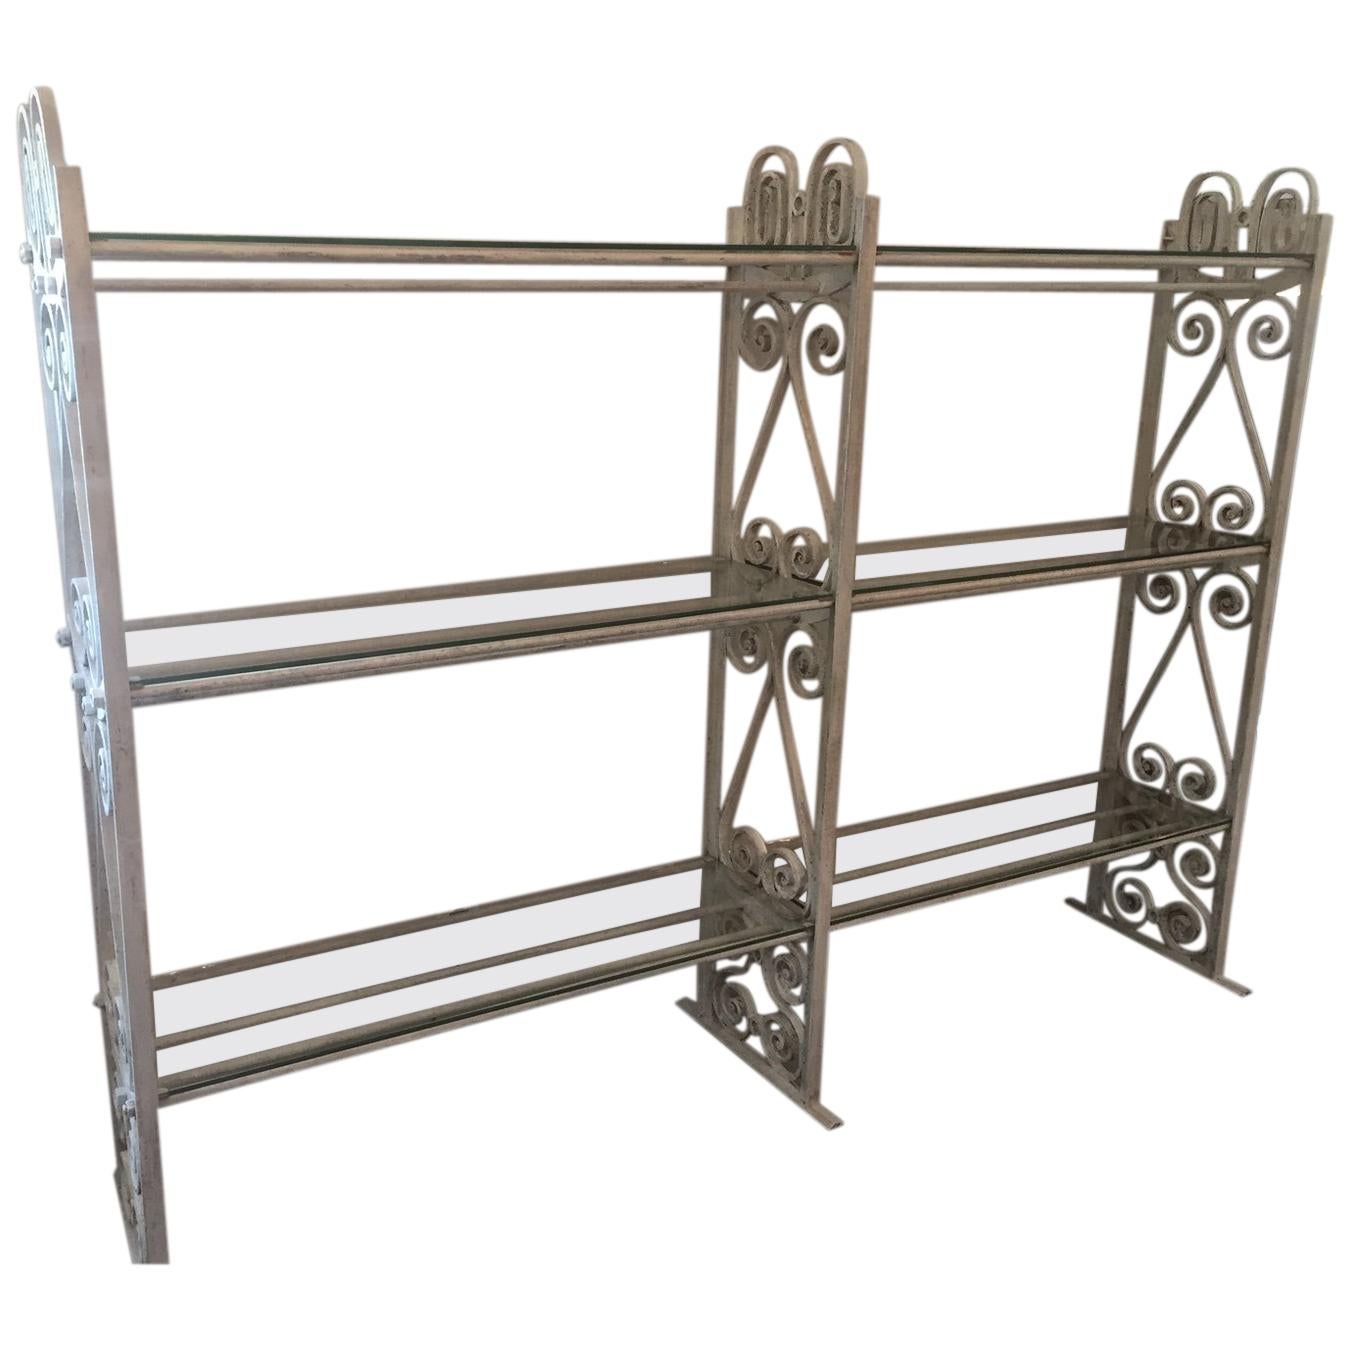 20th Century French Wrought Iron Florist Shelf, 1920s For Sale